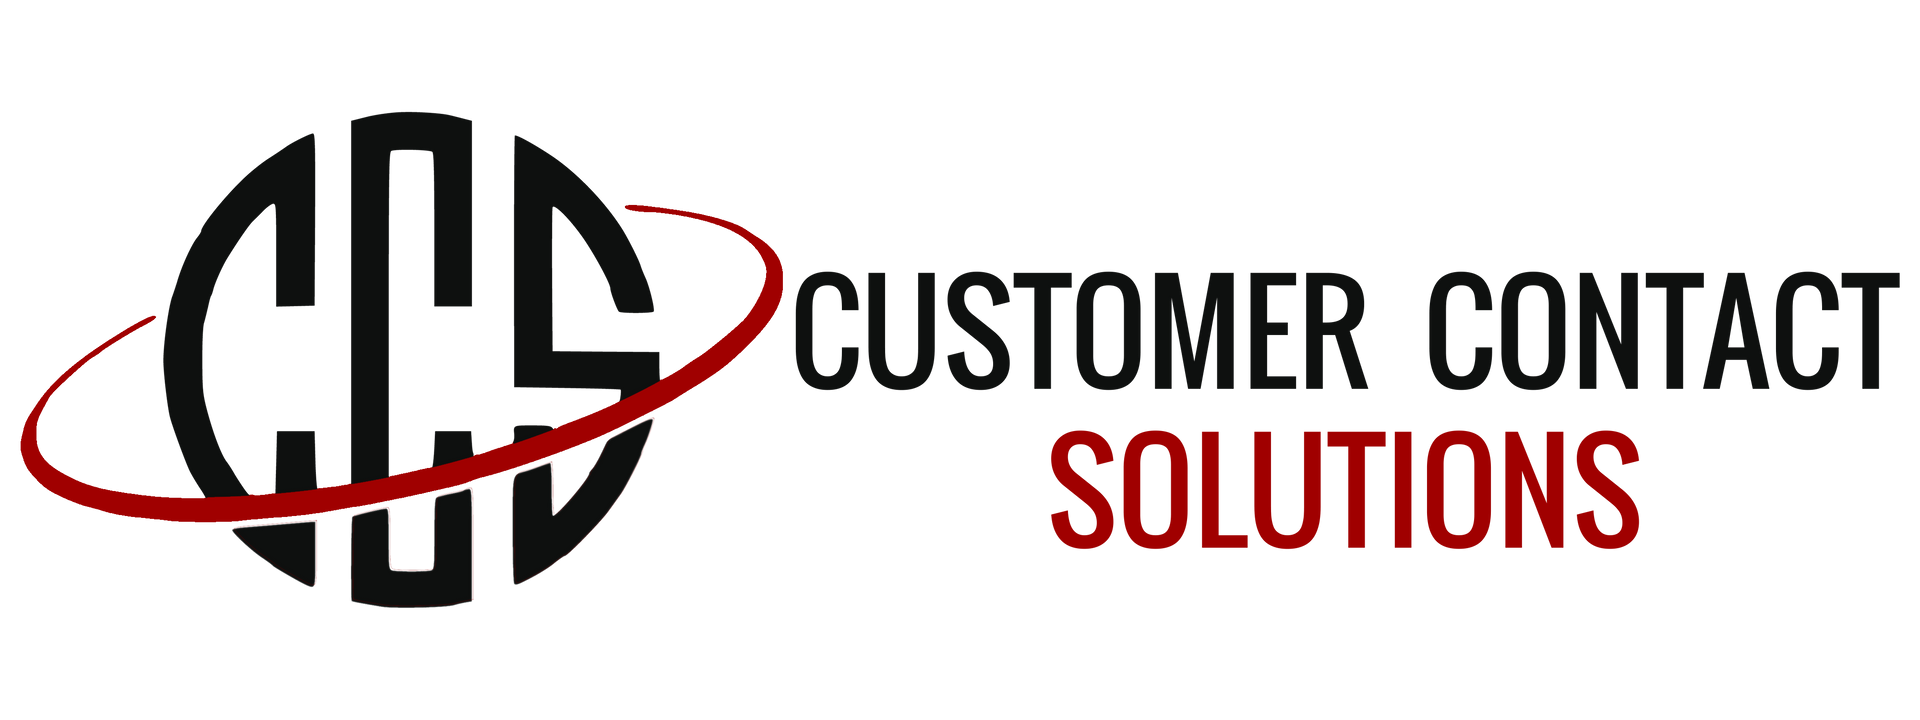 Customer Contact Solutions